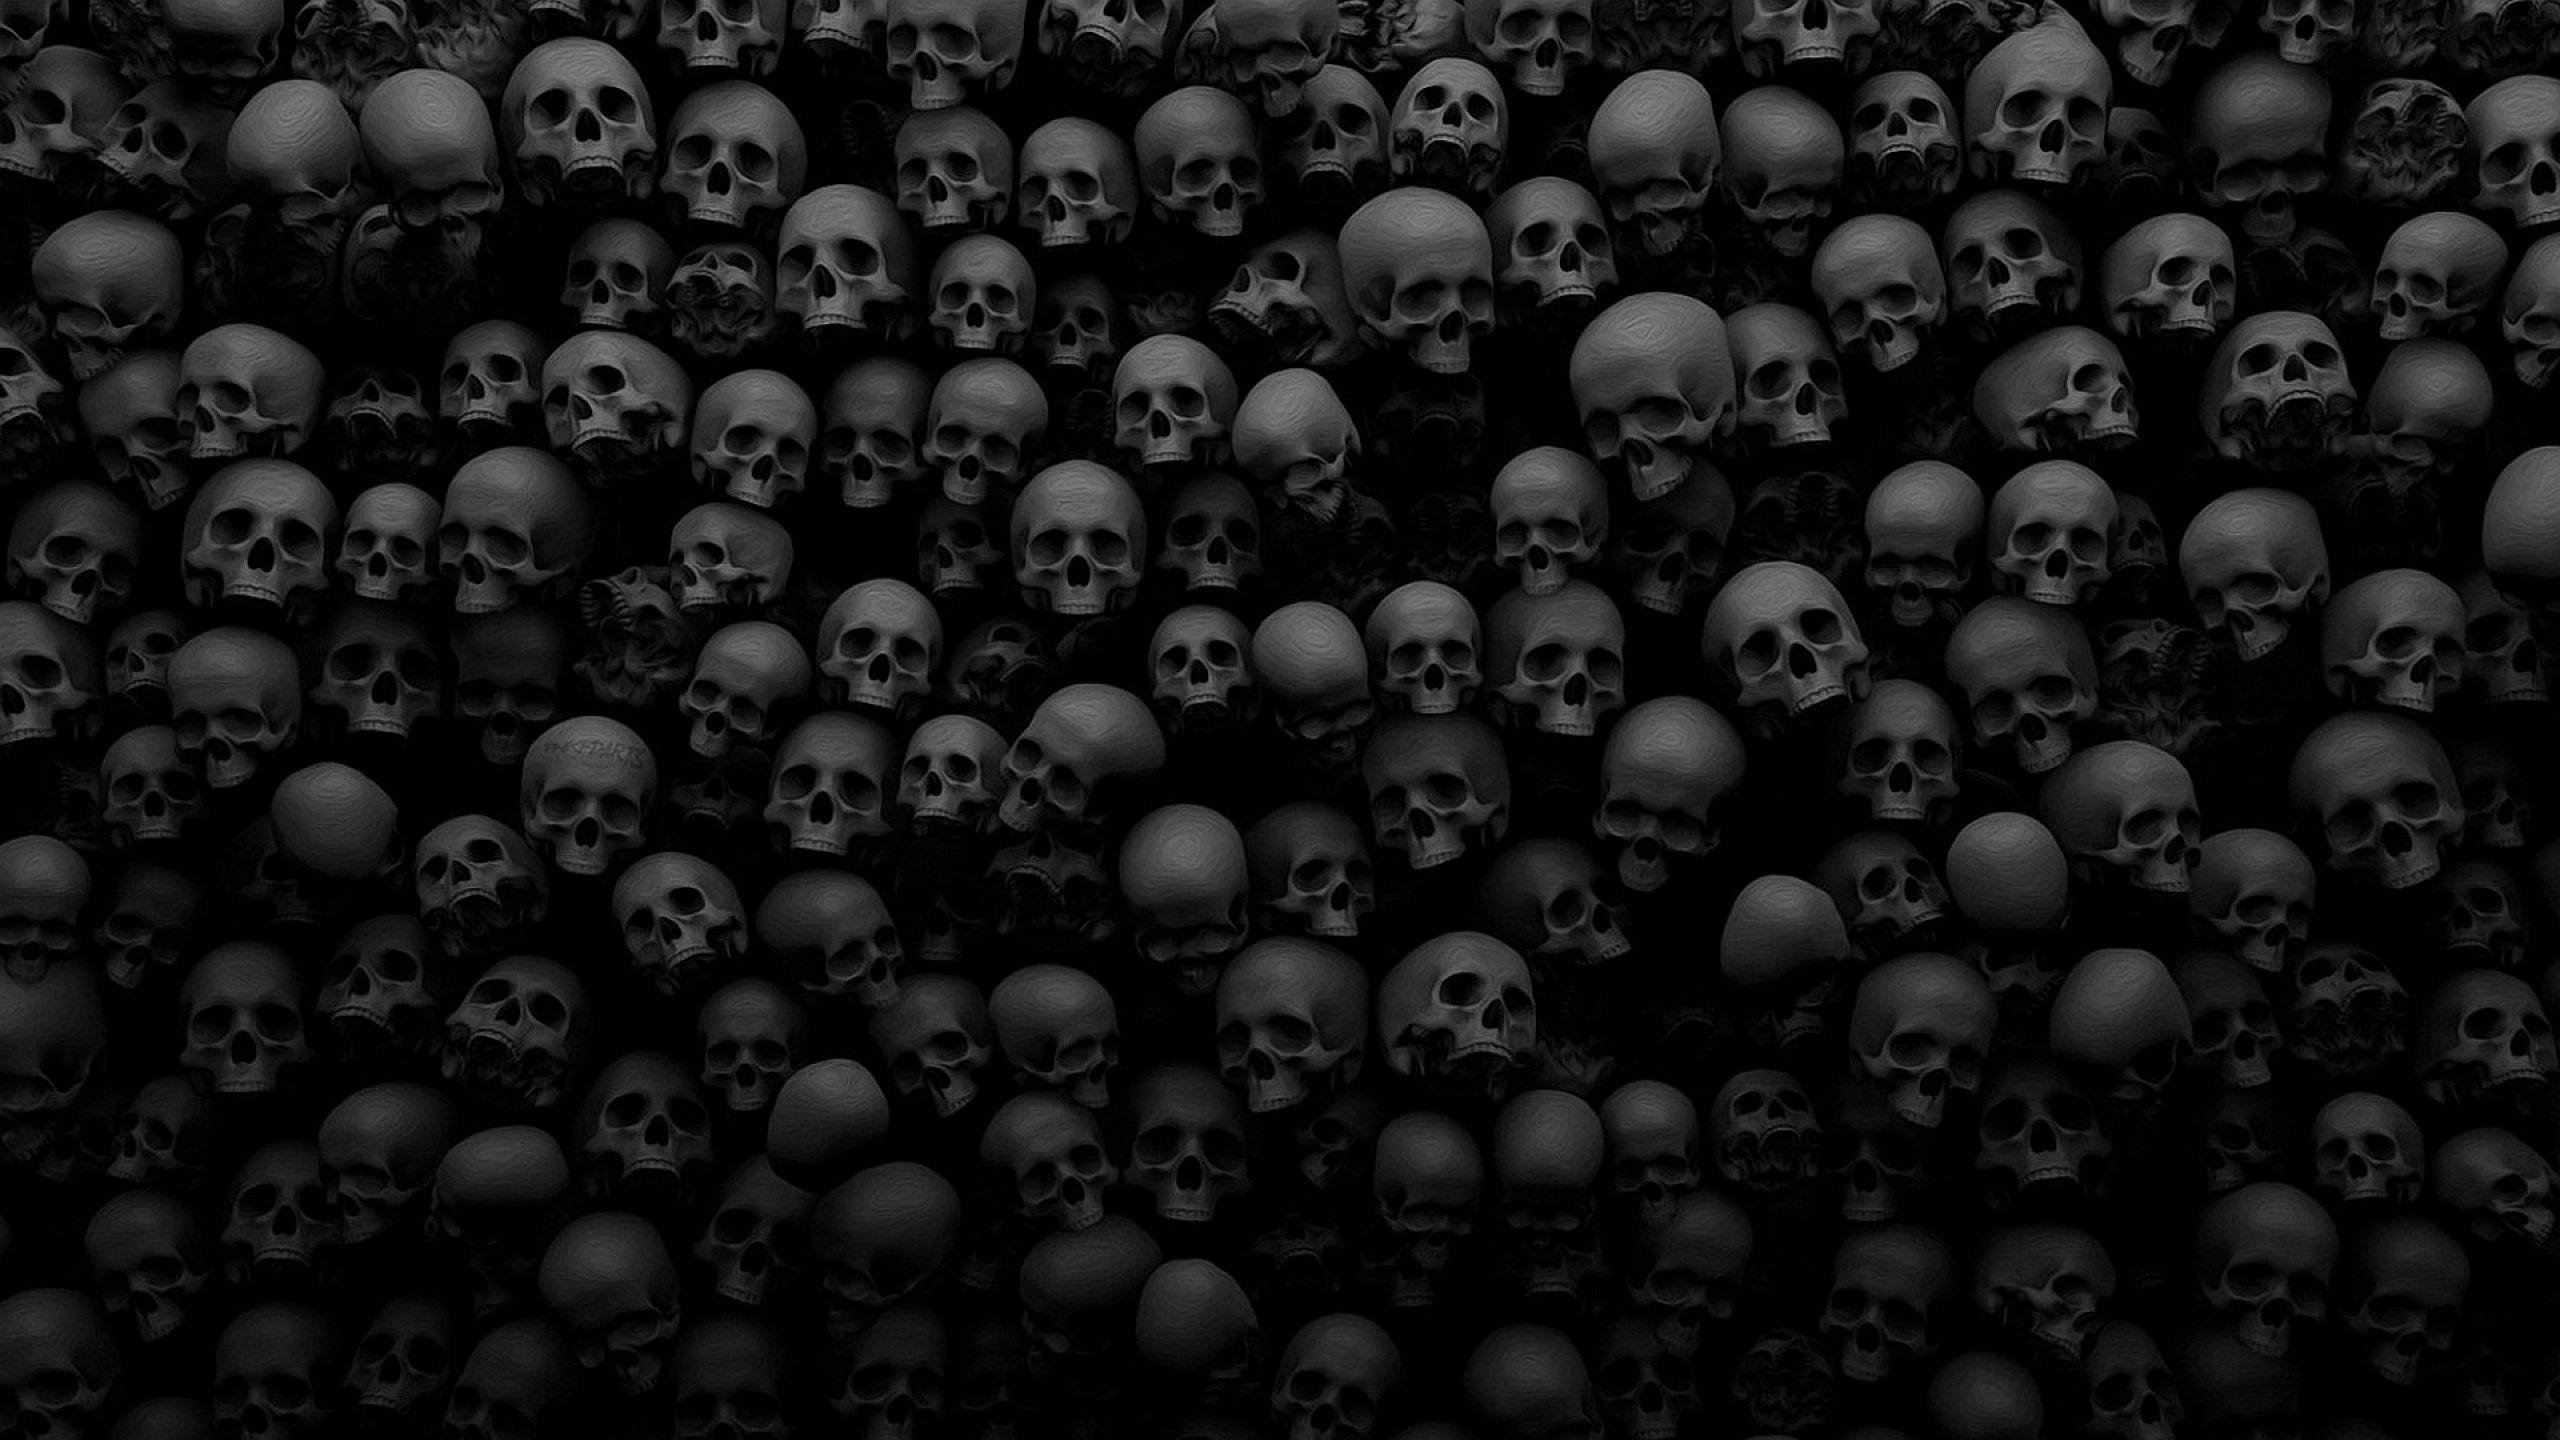 Dark and Scary Wallpaper